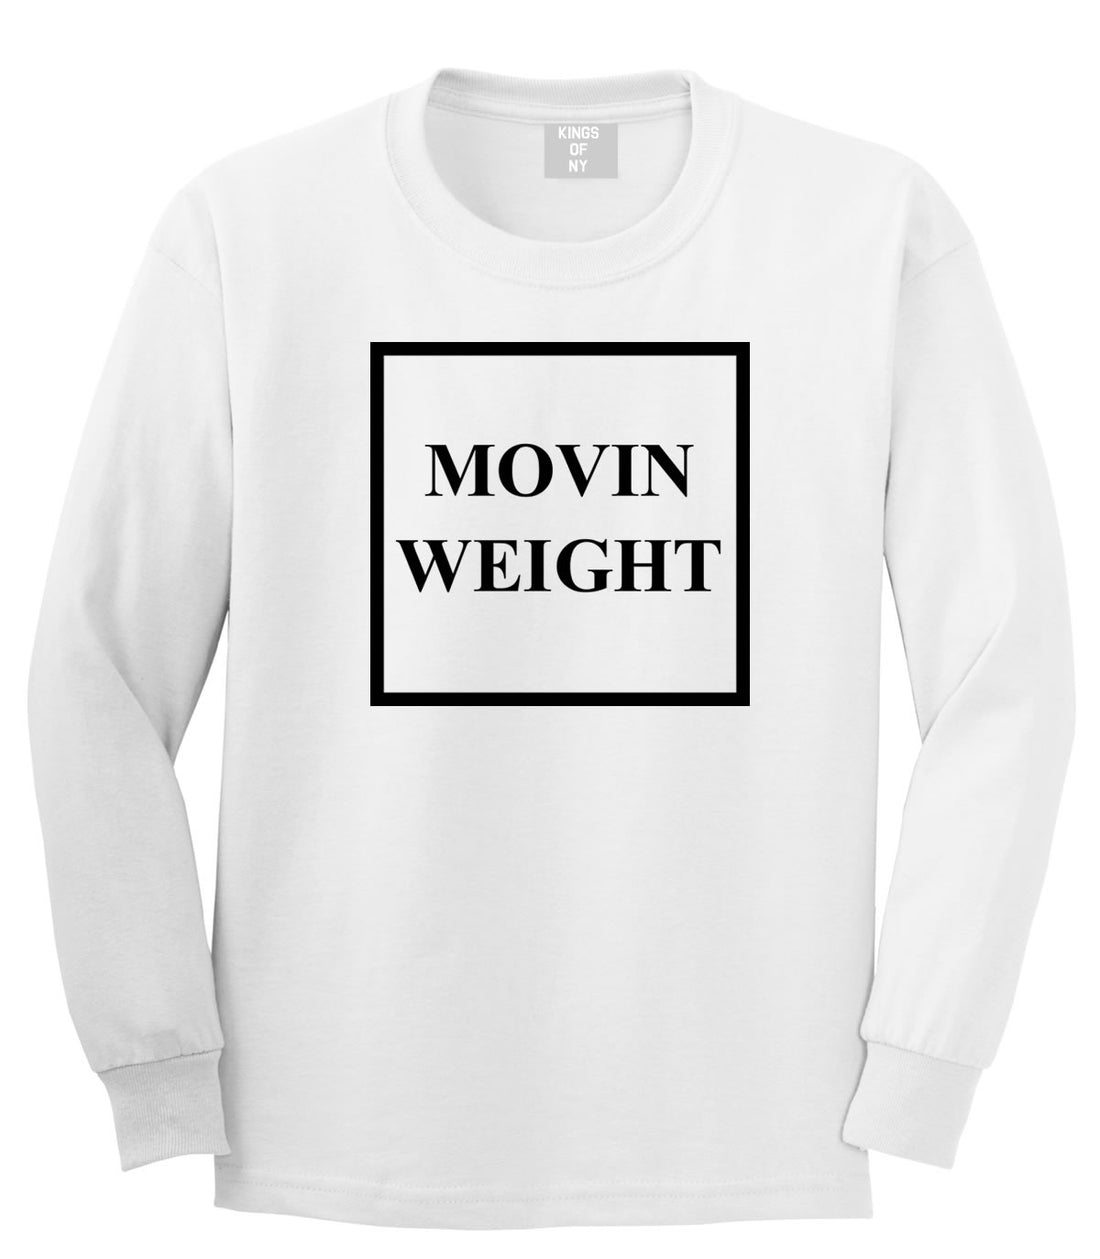 Movin Weight Hustler Long Sleeve T-Shirt in White by Kings Of NY